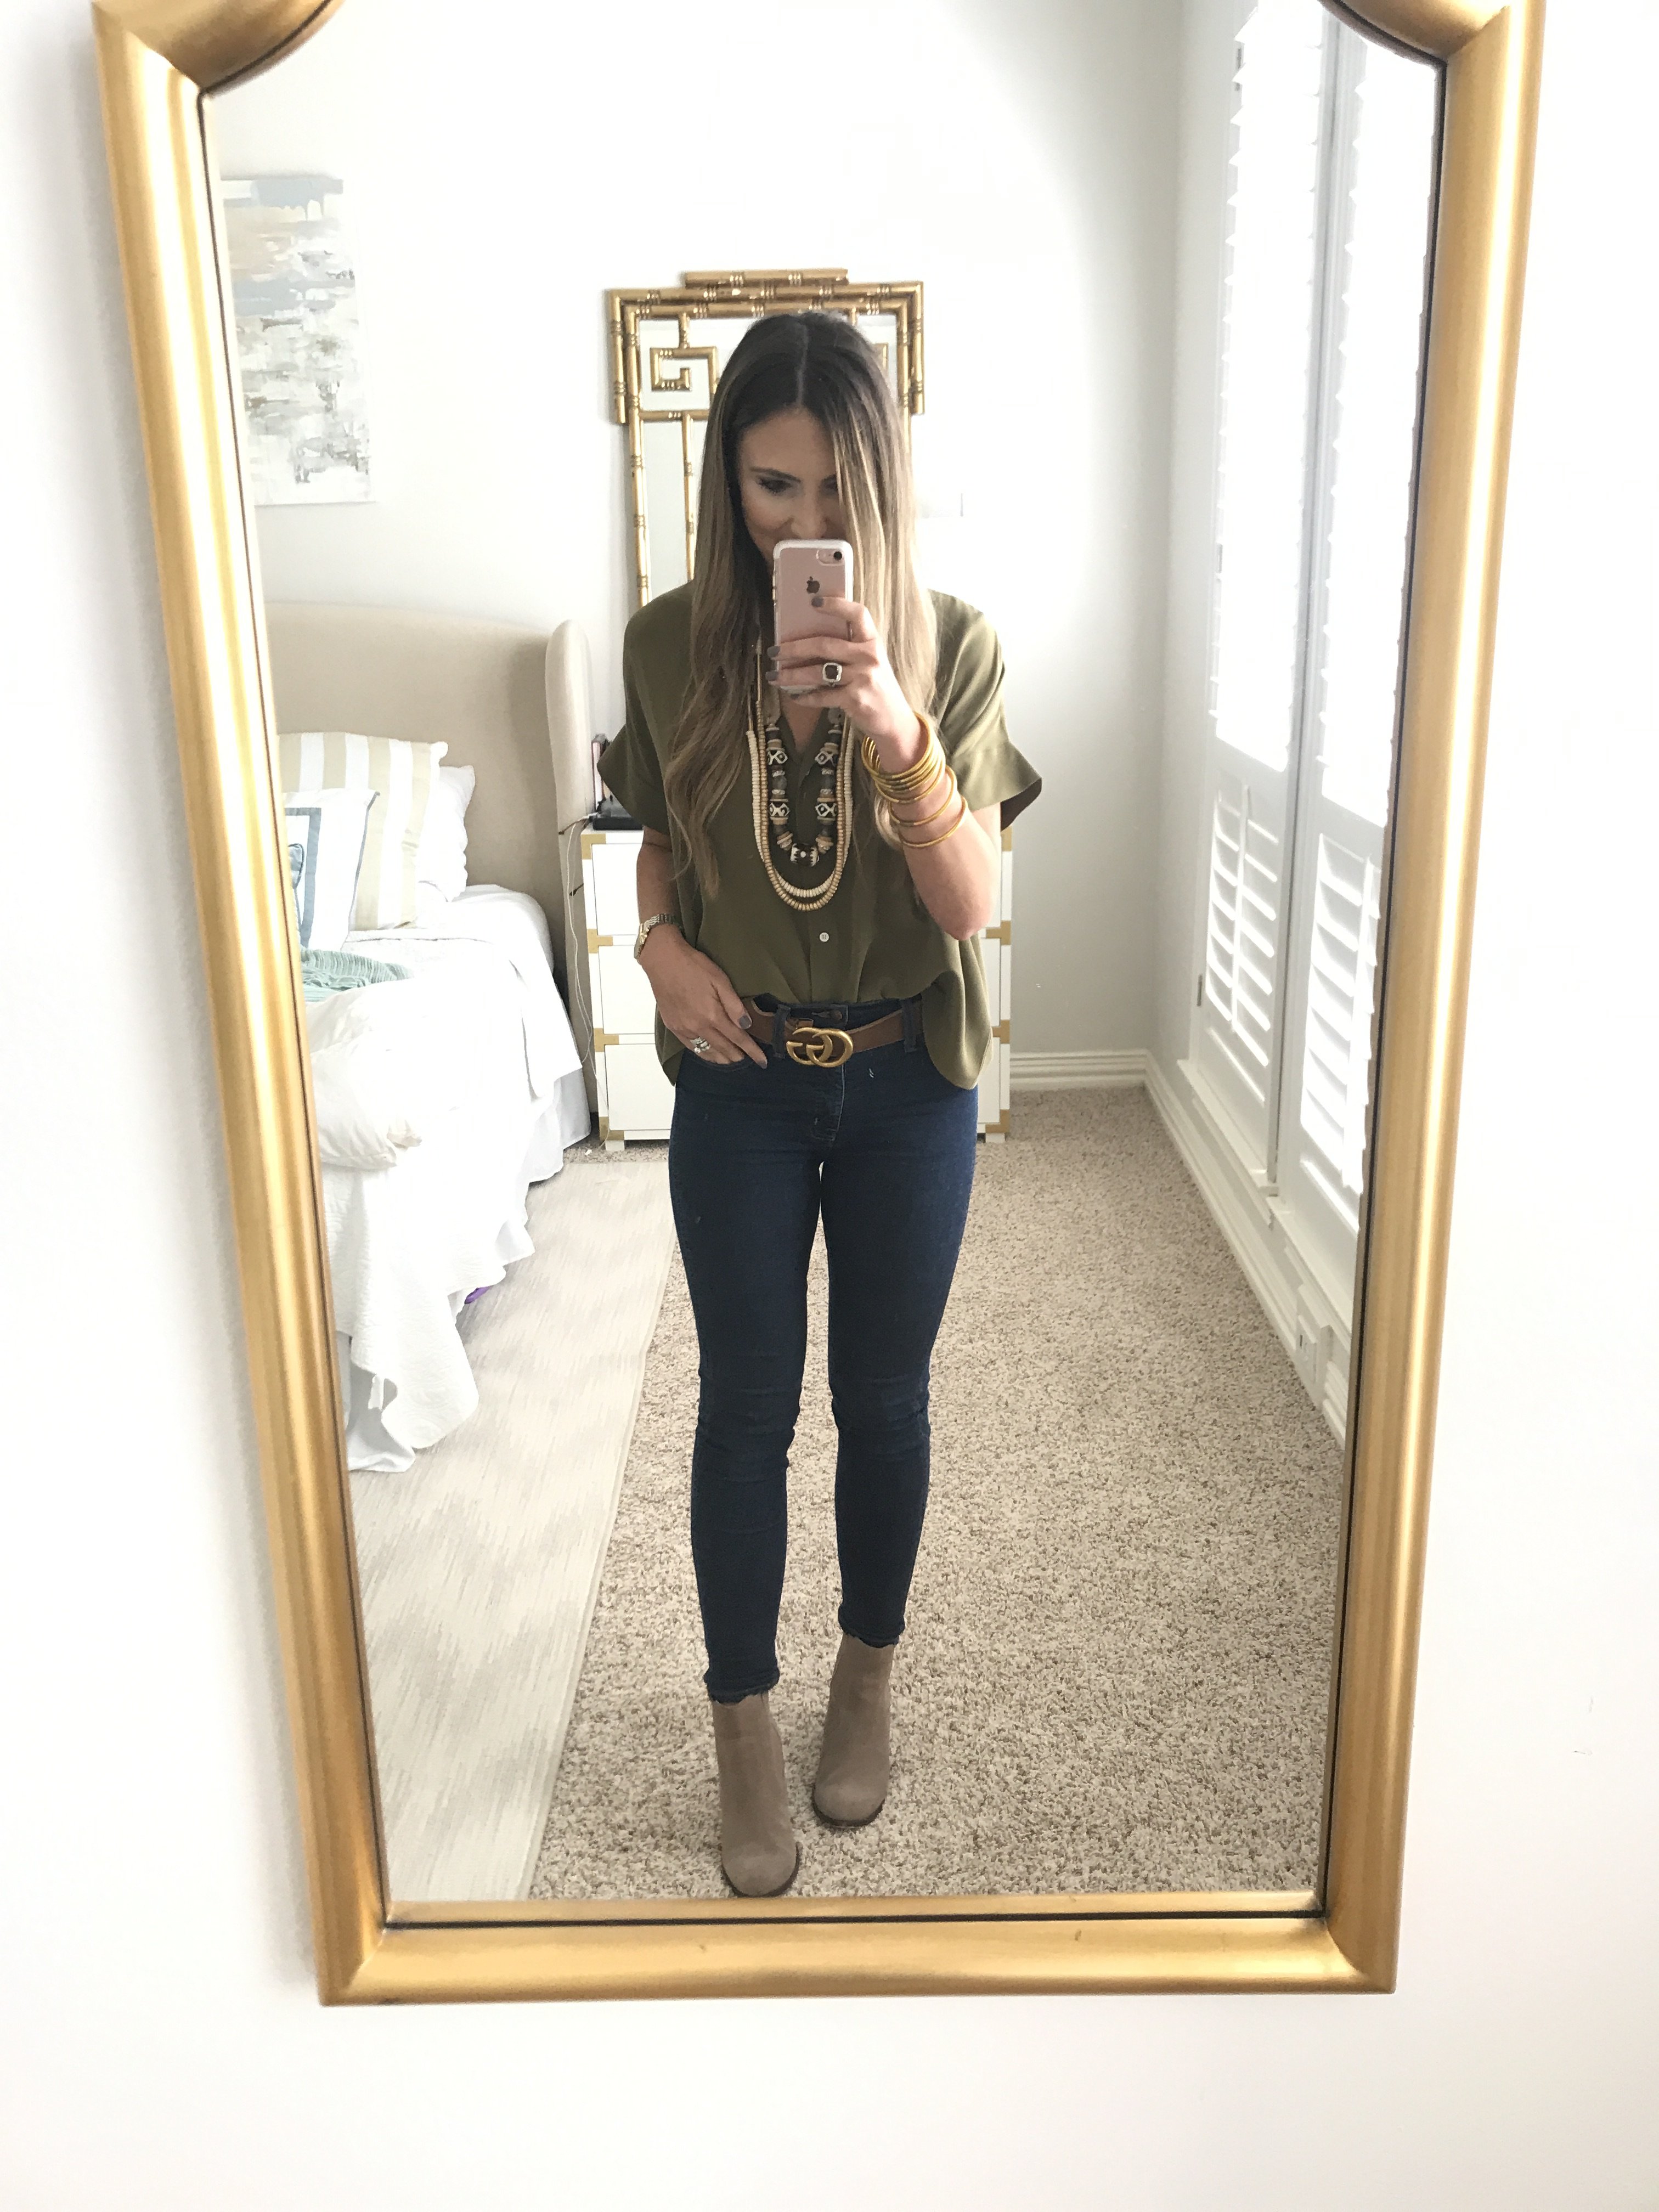 madewell 10'' rise skinny jeans - Best Fashion Sales That You Should Know About! featured by popular Dallas fashion blogger, Style Your Senses